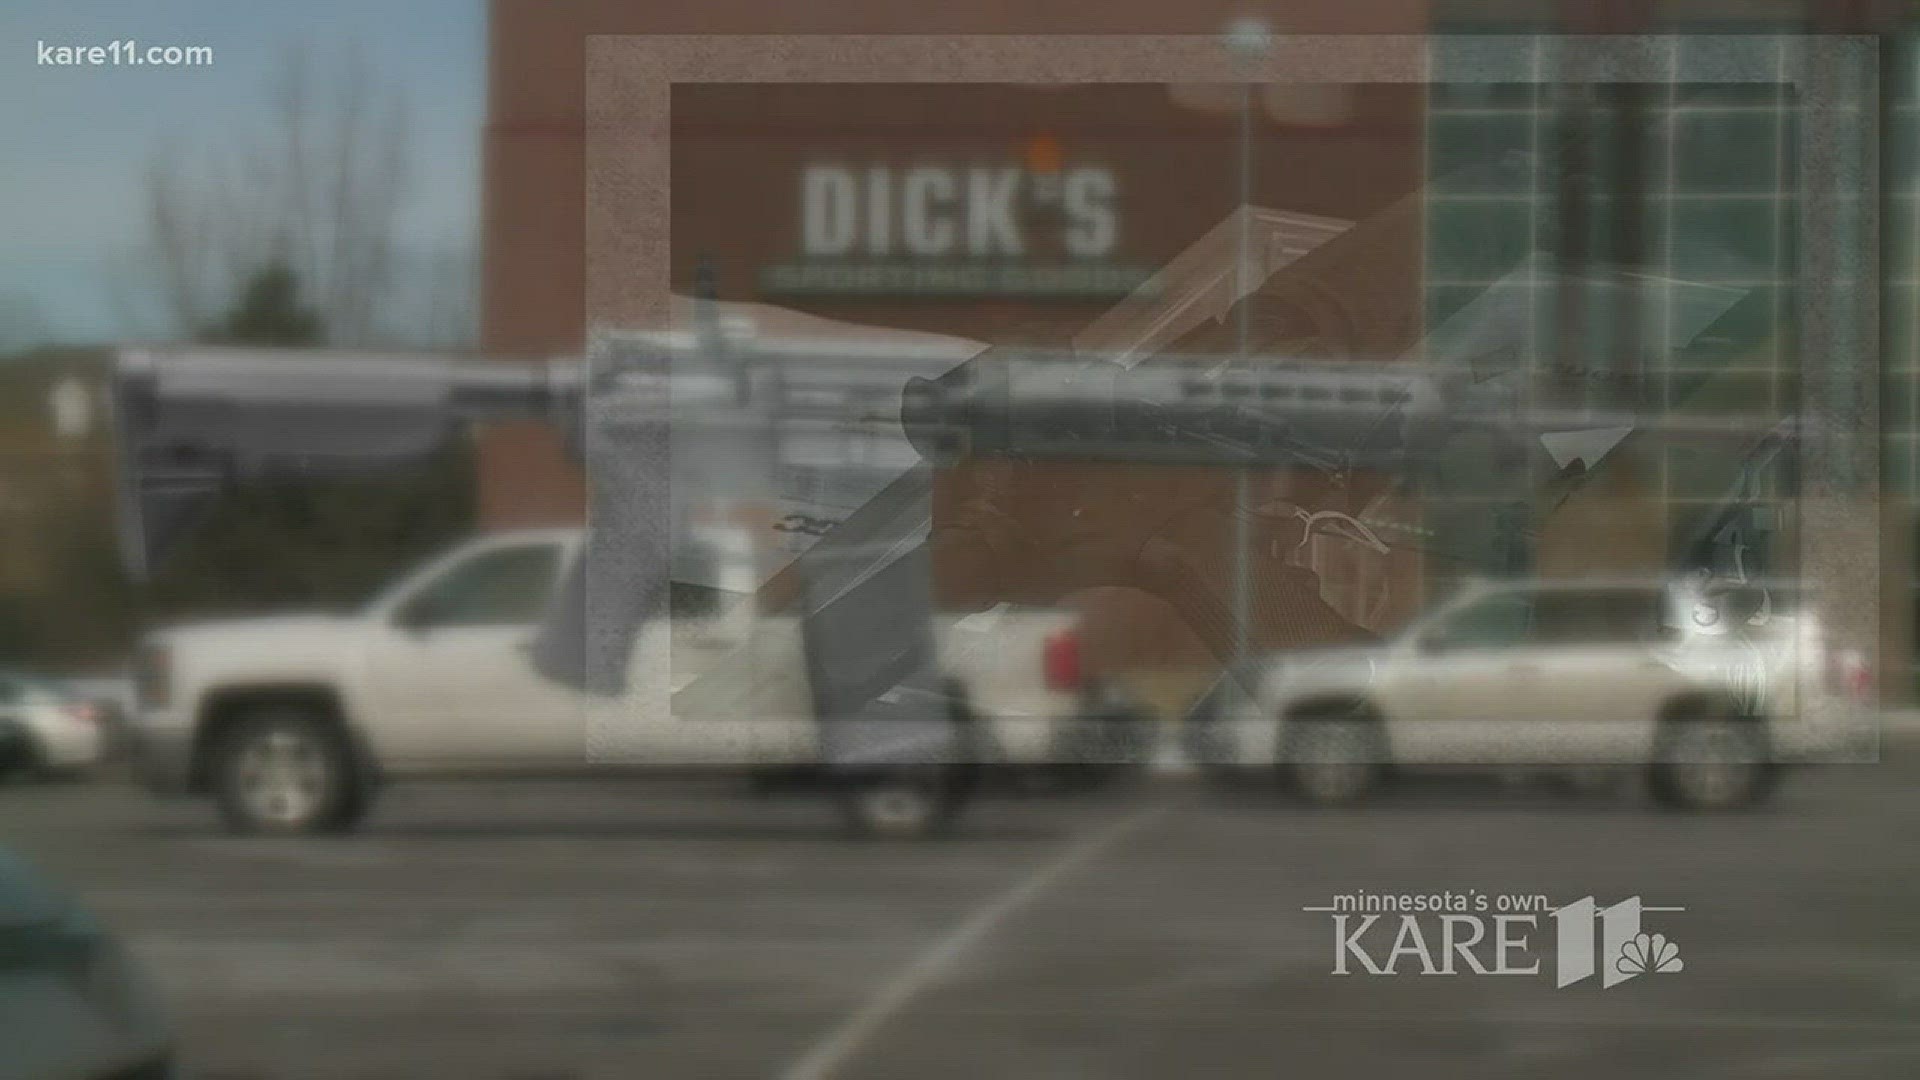 Dick's Sporting Goods announced it will stop selling assault-style rifles in stores nationwide after this month's school shooting in Parkland, Fla. - a move similar to one it made after the 2012 school shooting in Newtown, Conn. Brave? Or a PR stunt? http